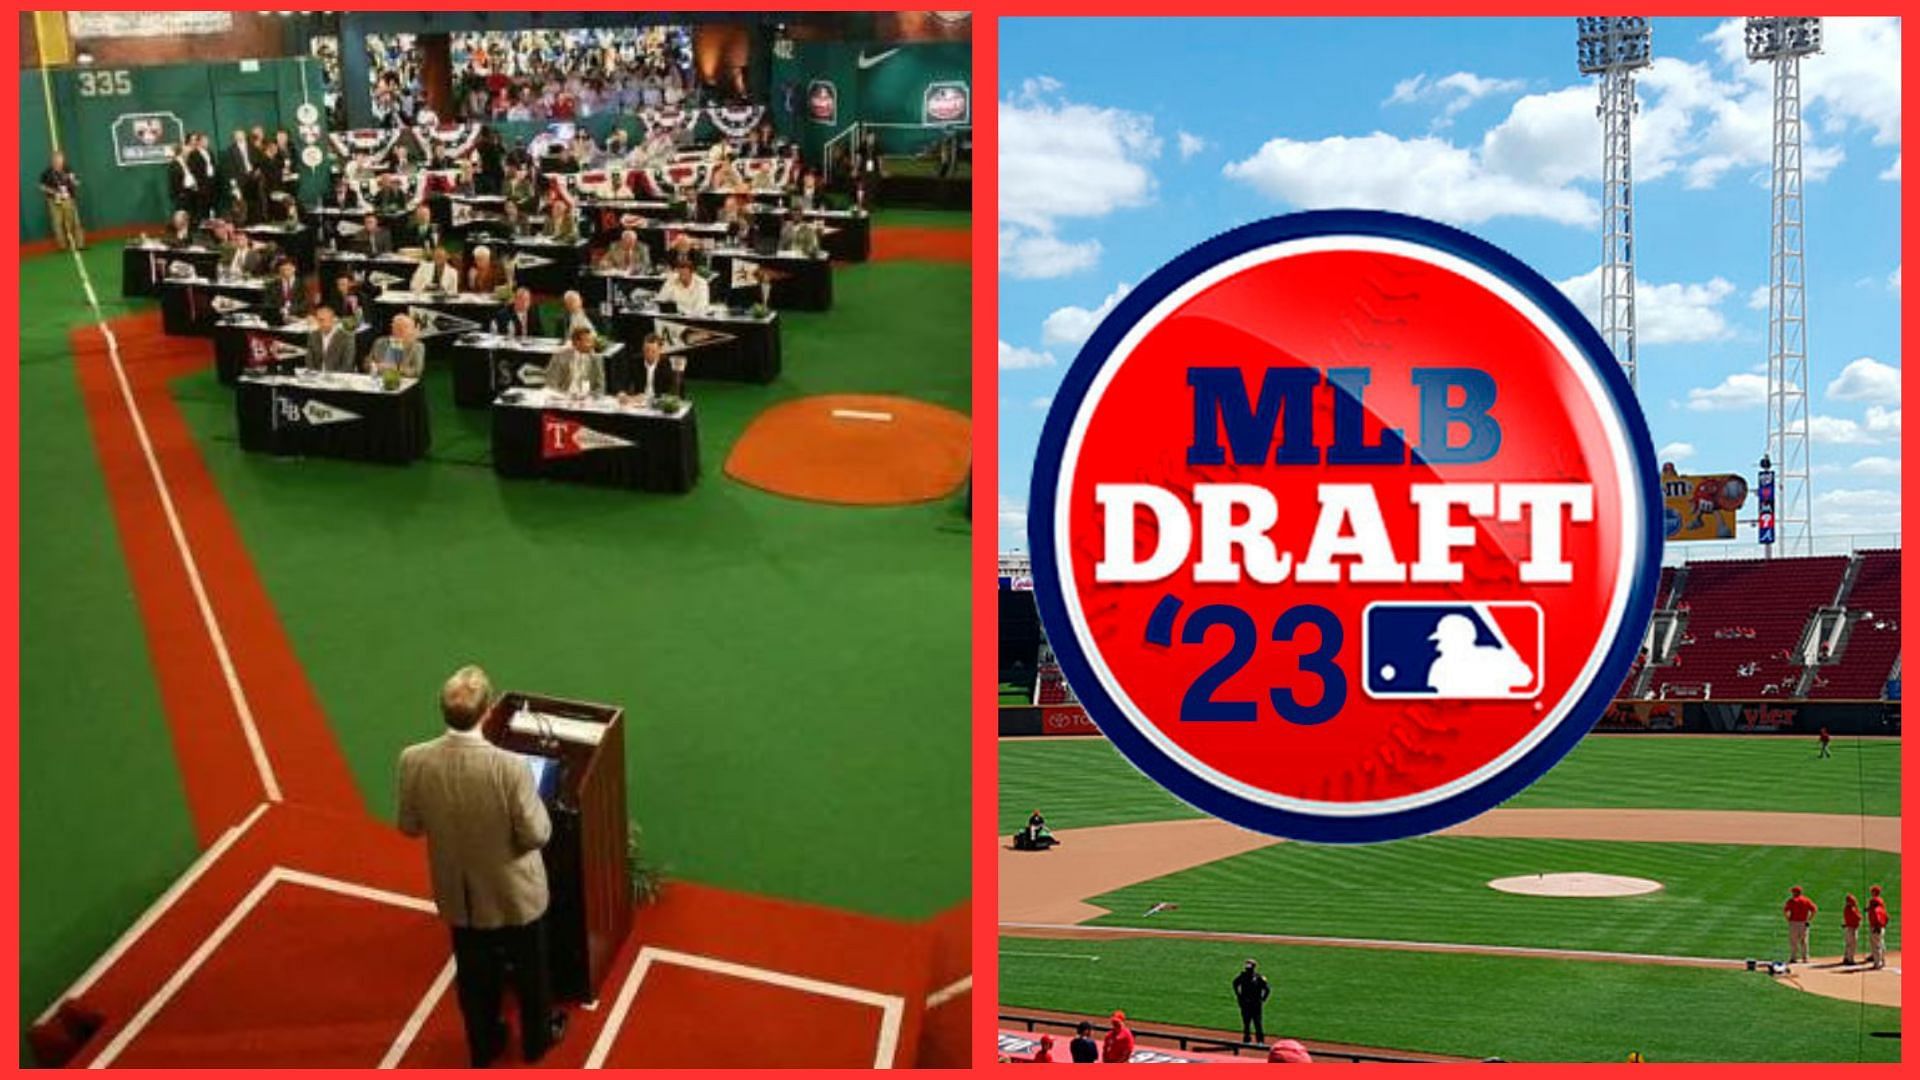 MLB Draft 2023: Which rounds are on which days